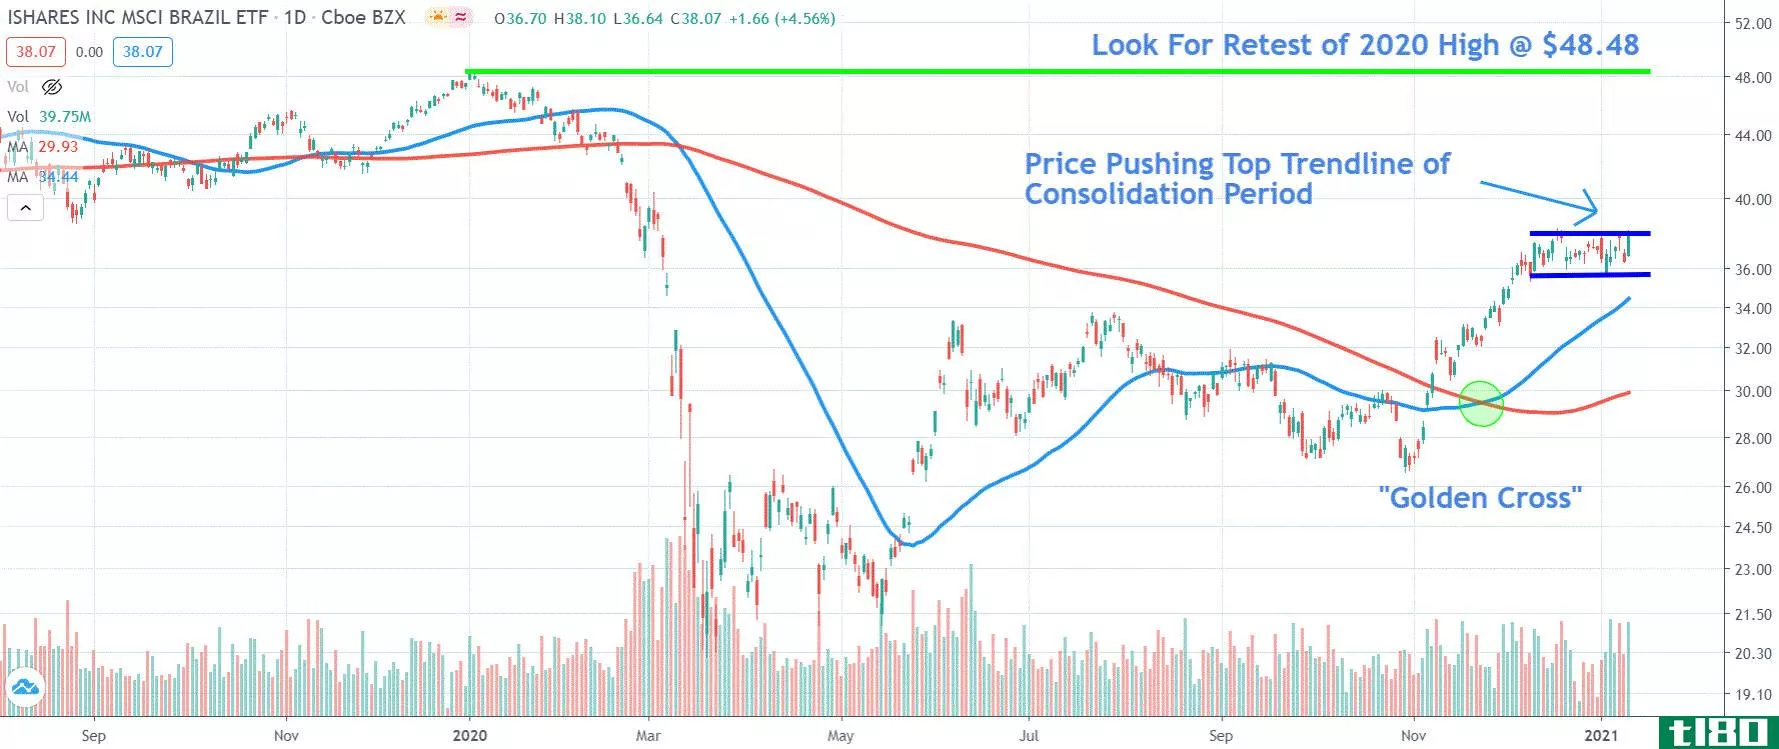 Chart depicting the share price of the iShares MSCI Brazil ETF (EWZ)